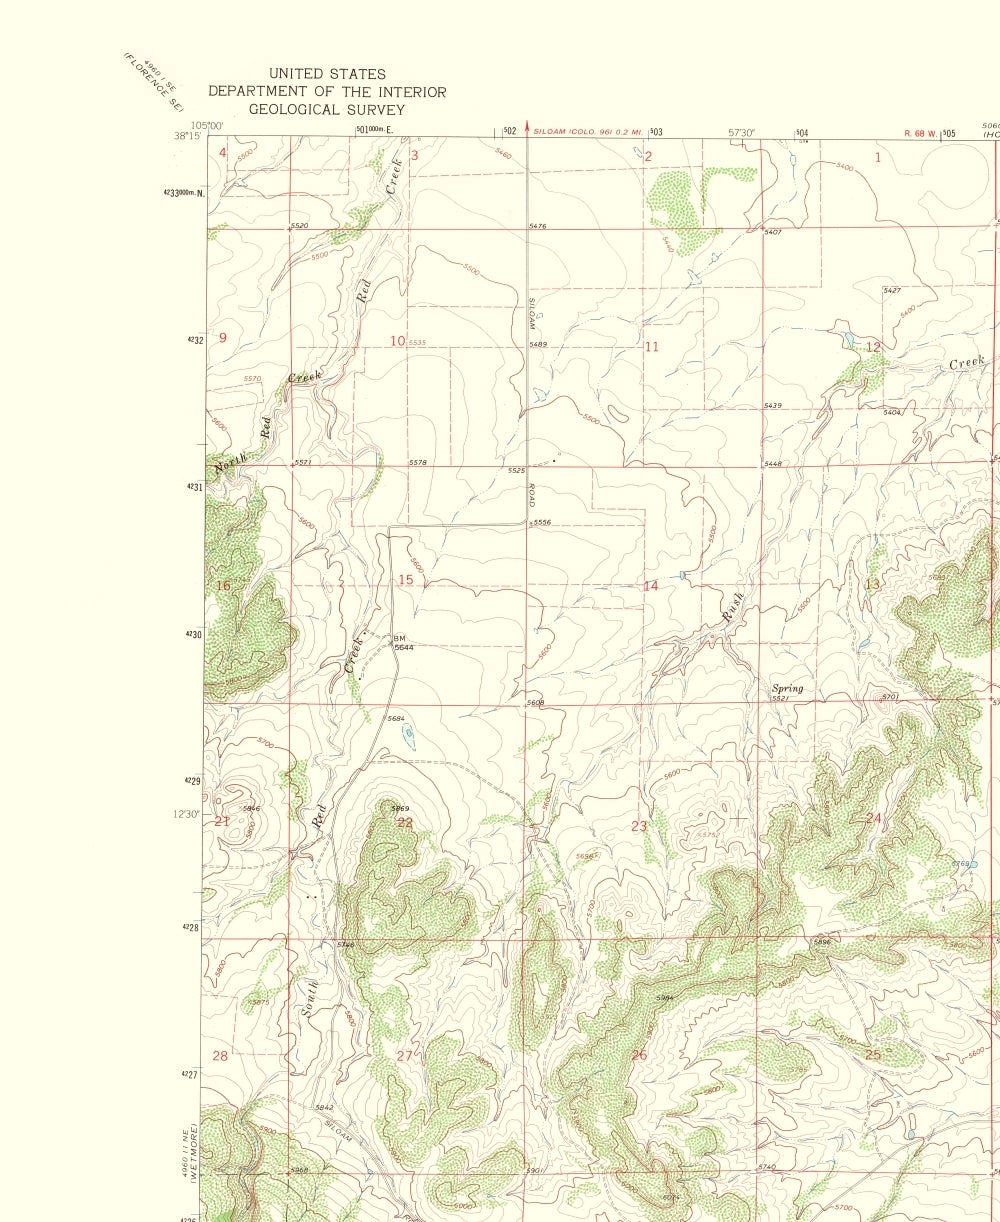 Topographical Map - Owl Canyon Colorado Quad - USGS 1965 - 23 x 28.10 - Vintage Wall Art